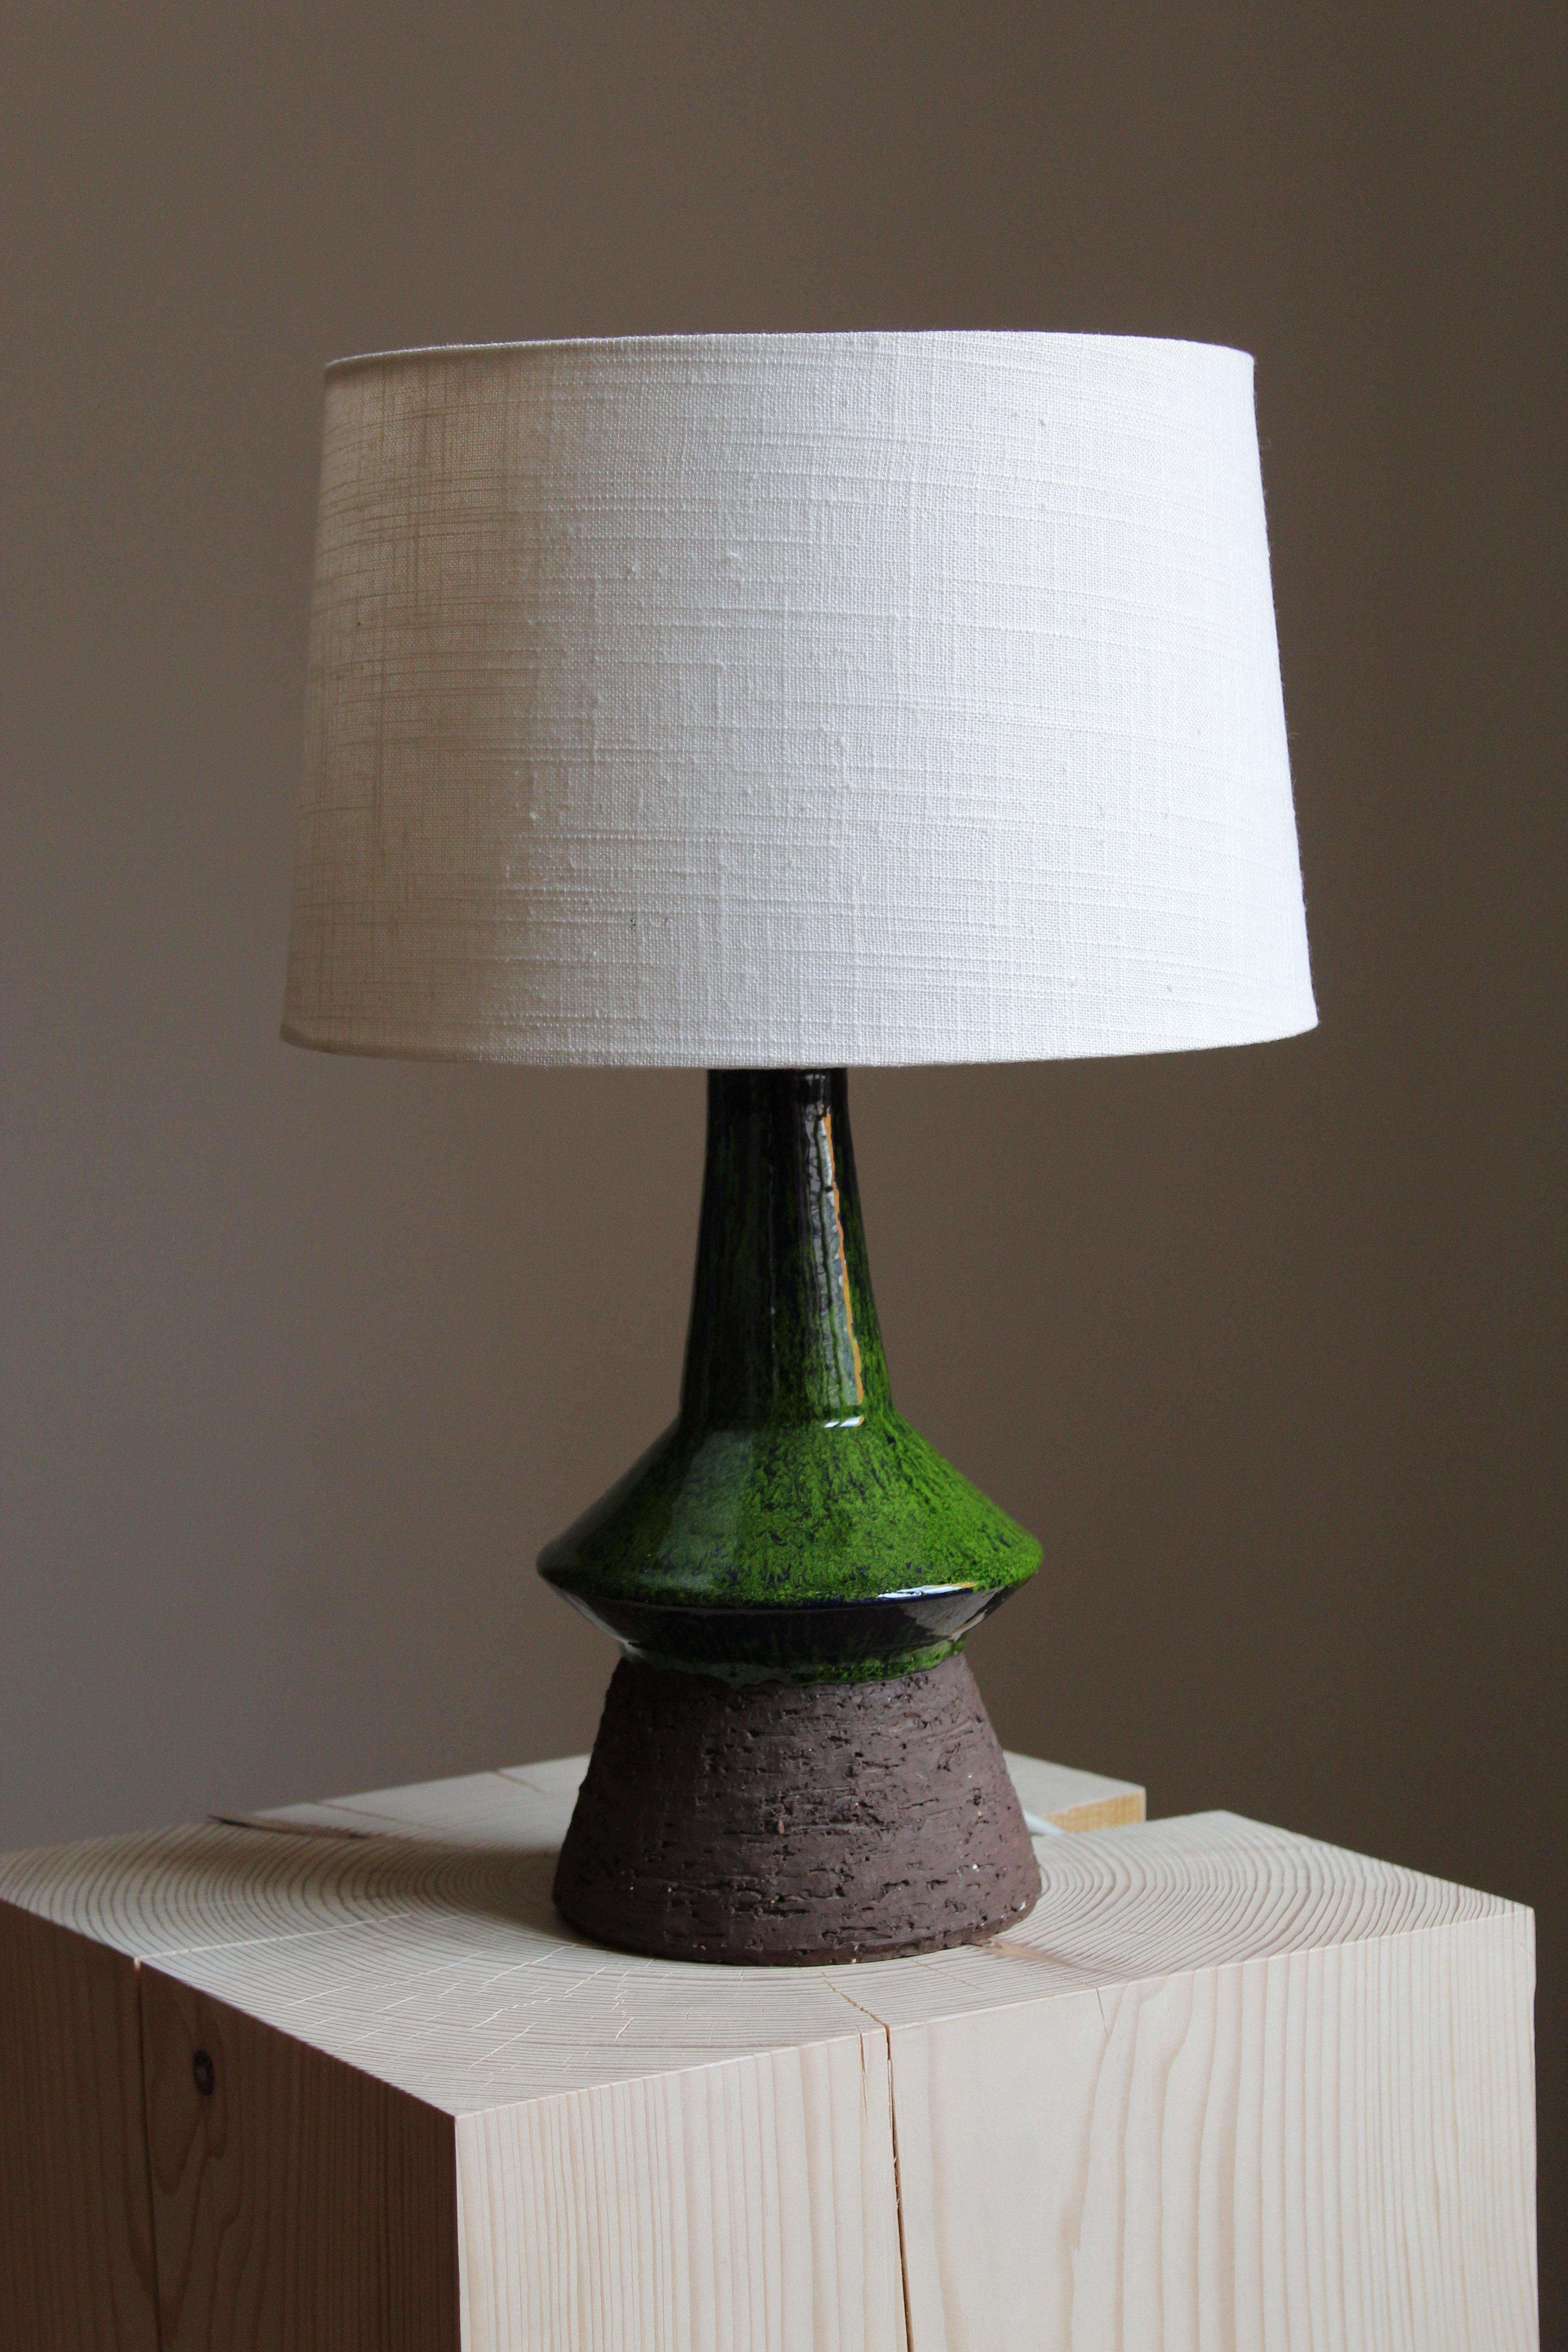 A modernist table lamp. Designed and produced in Denmark, 1950s. Unsigned. 

Sold without lampshade.

Glaze features green-grey colors.

Other designers of the period include Axel Salto, Arne Bang, Carl-Harry Stålhane, Gunnar Nylund and Wilhelm Kåge.